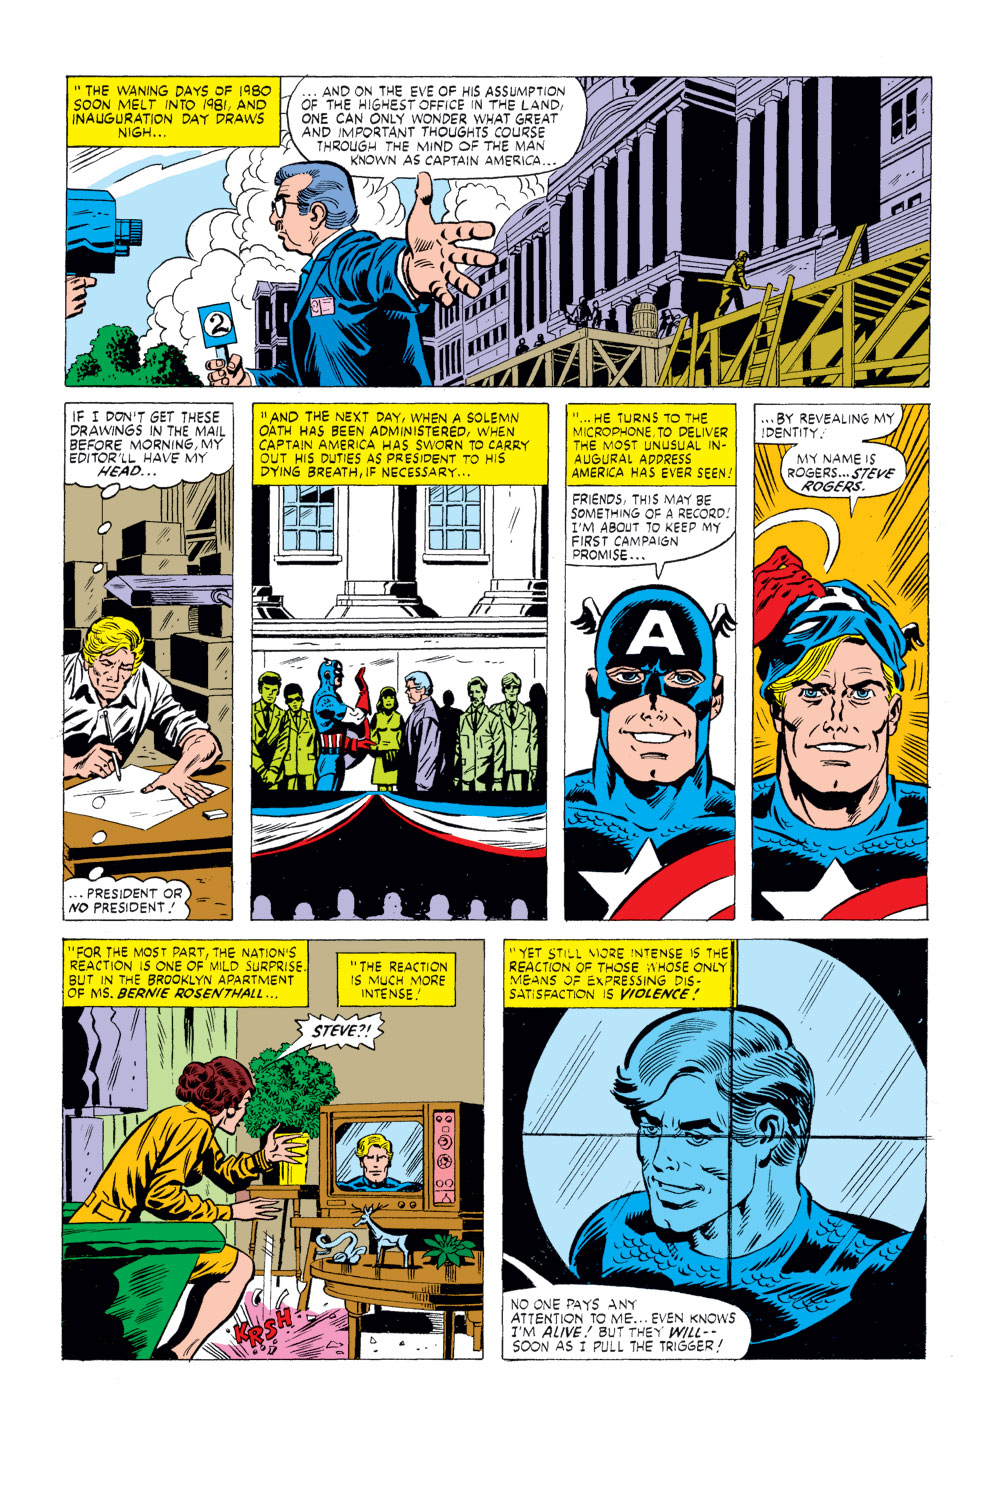 What If? (1977) issue 26 - Captain America had been elected president - Page 10